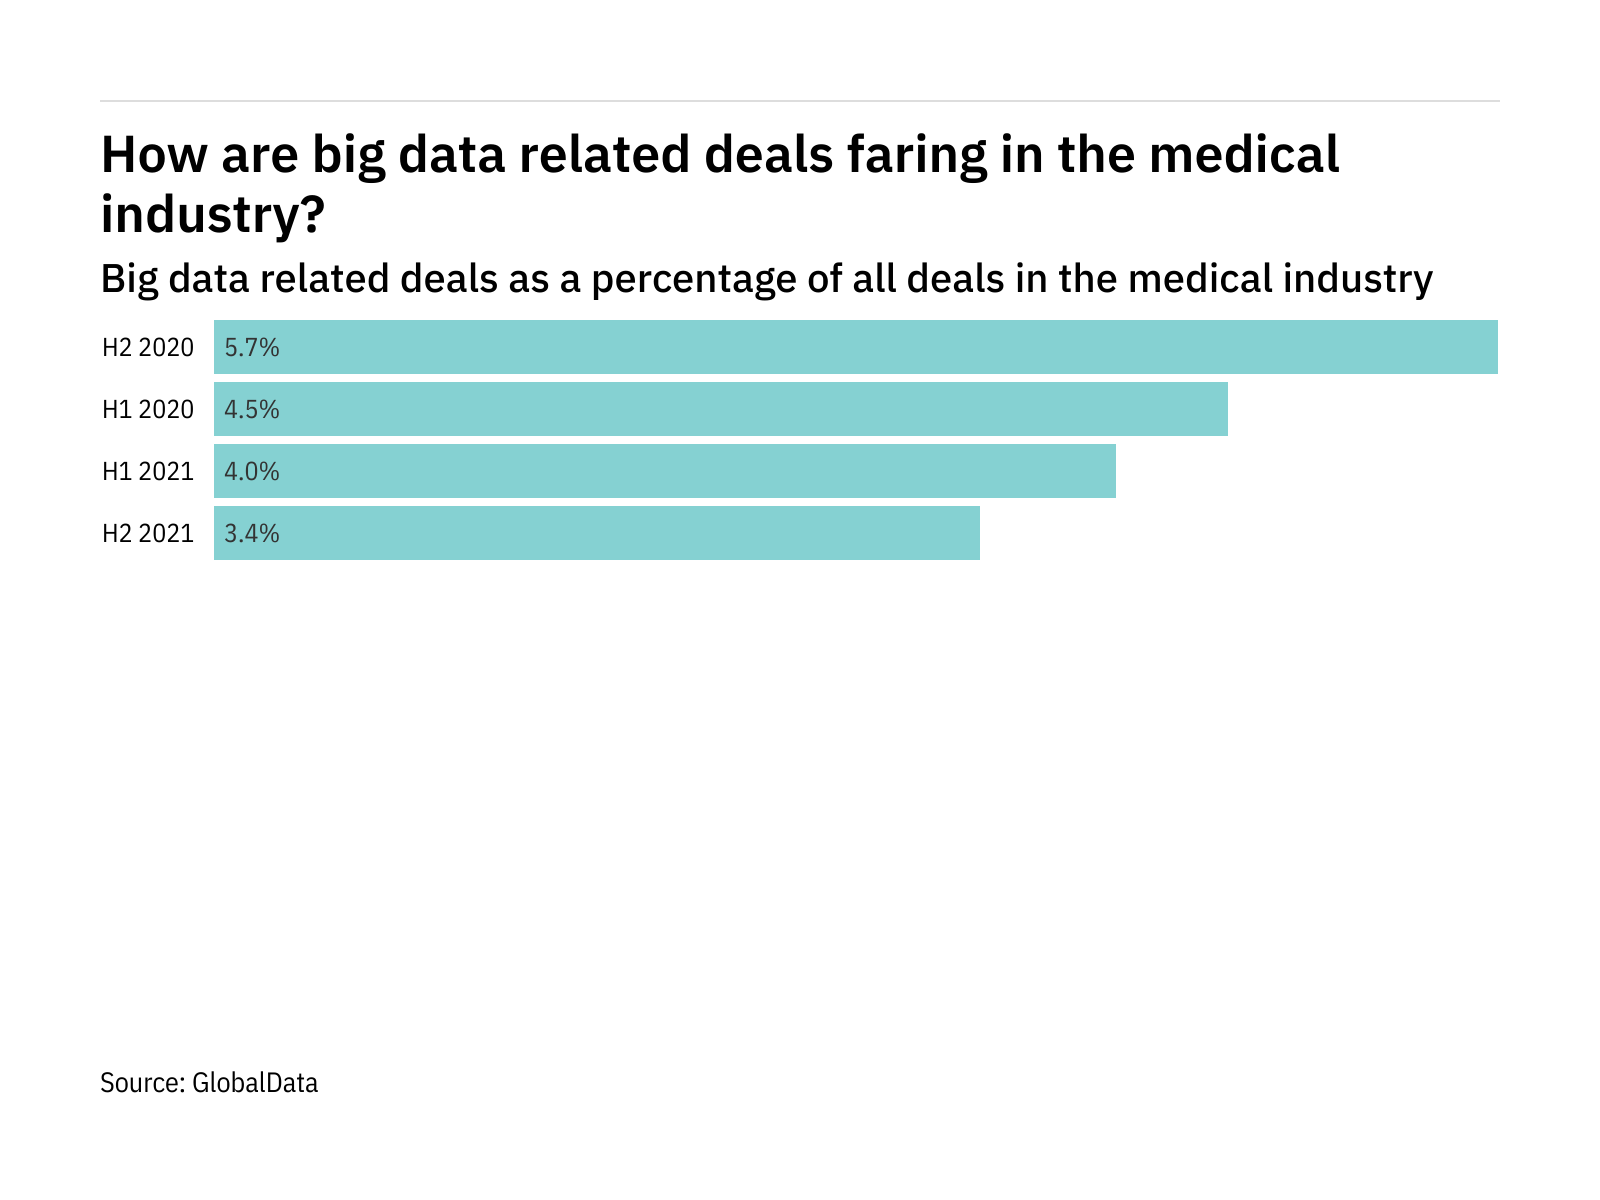 Deals relating to big data decreased significantly in the medical industry in H2 2021